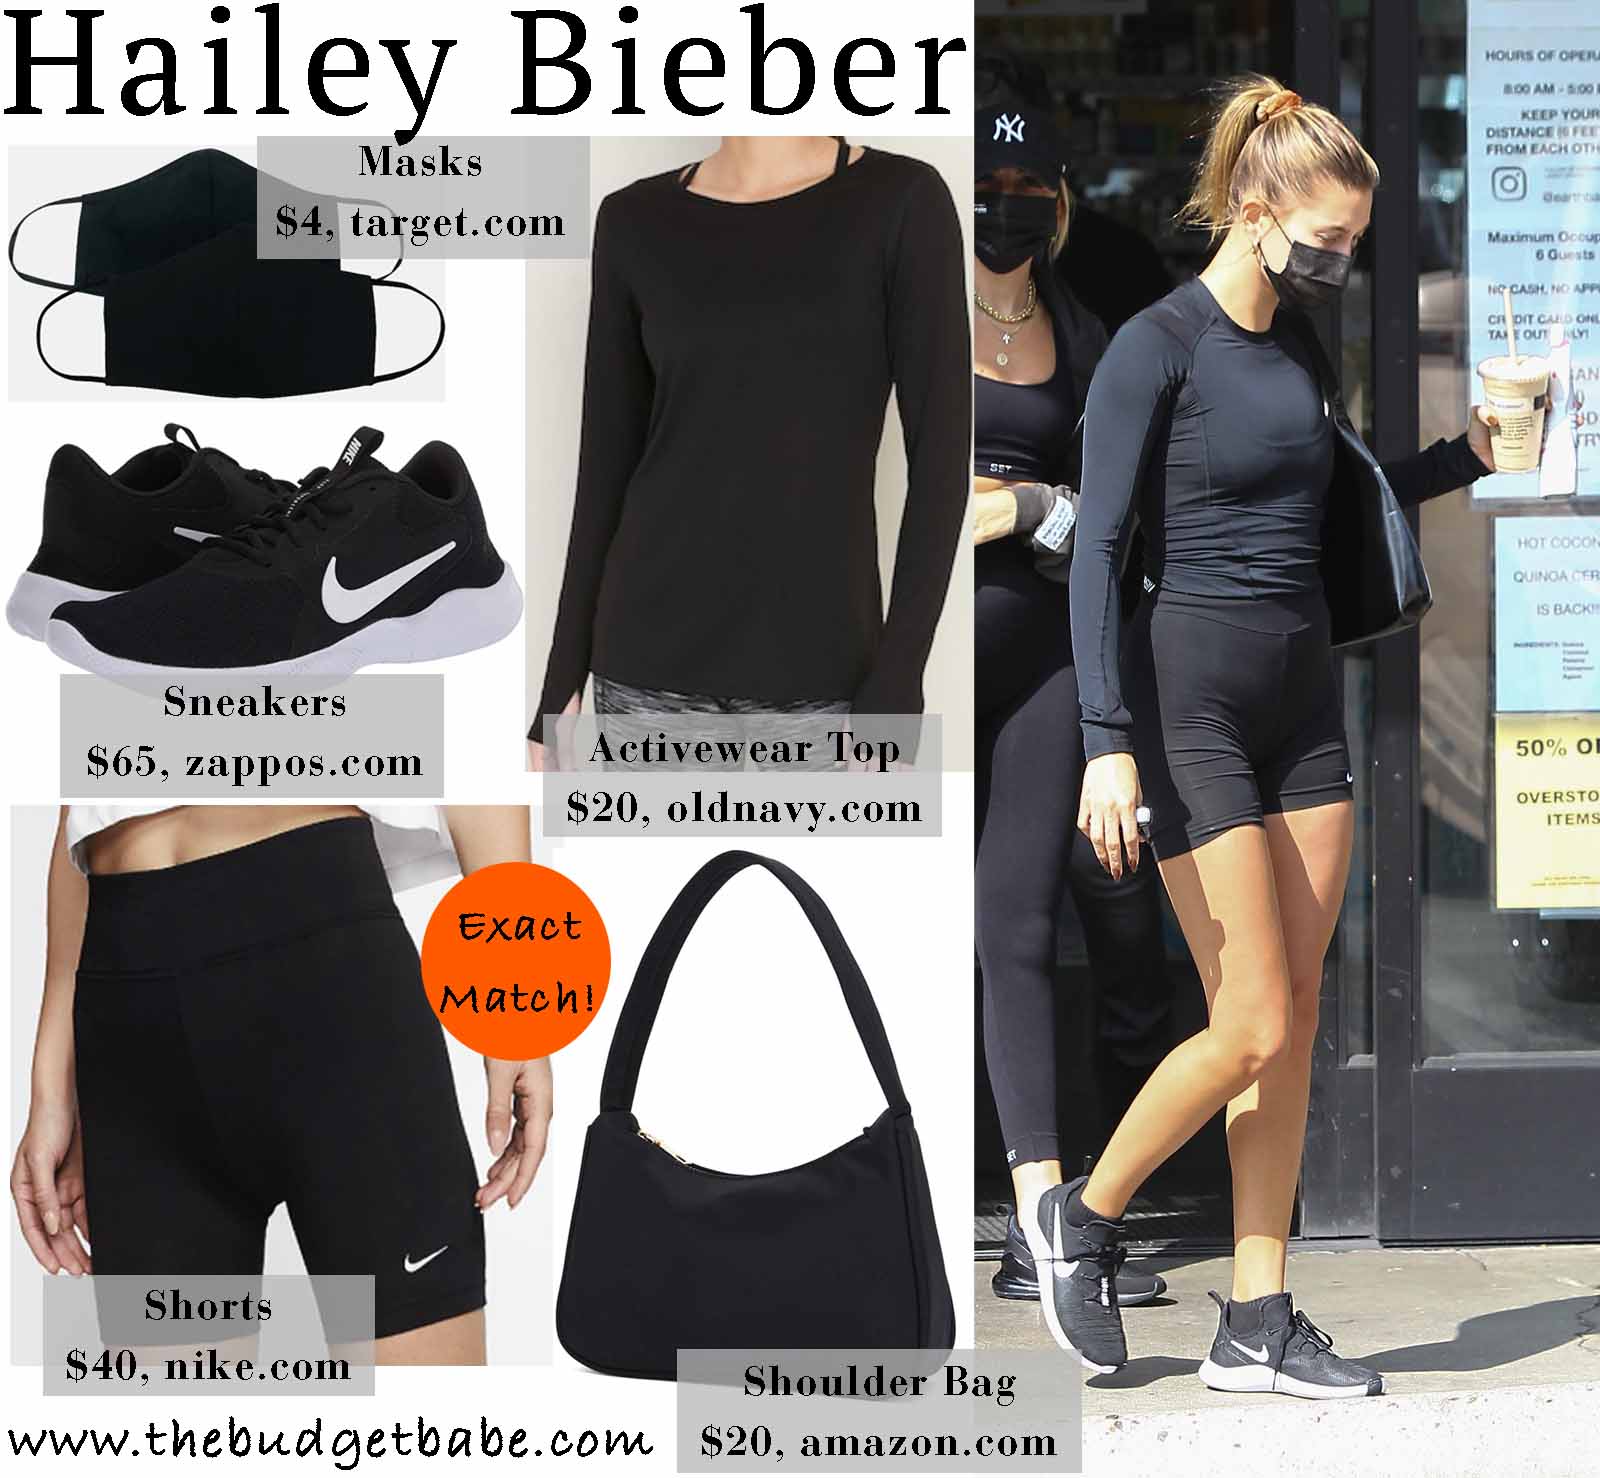 Hailey is chic in Nike.